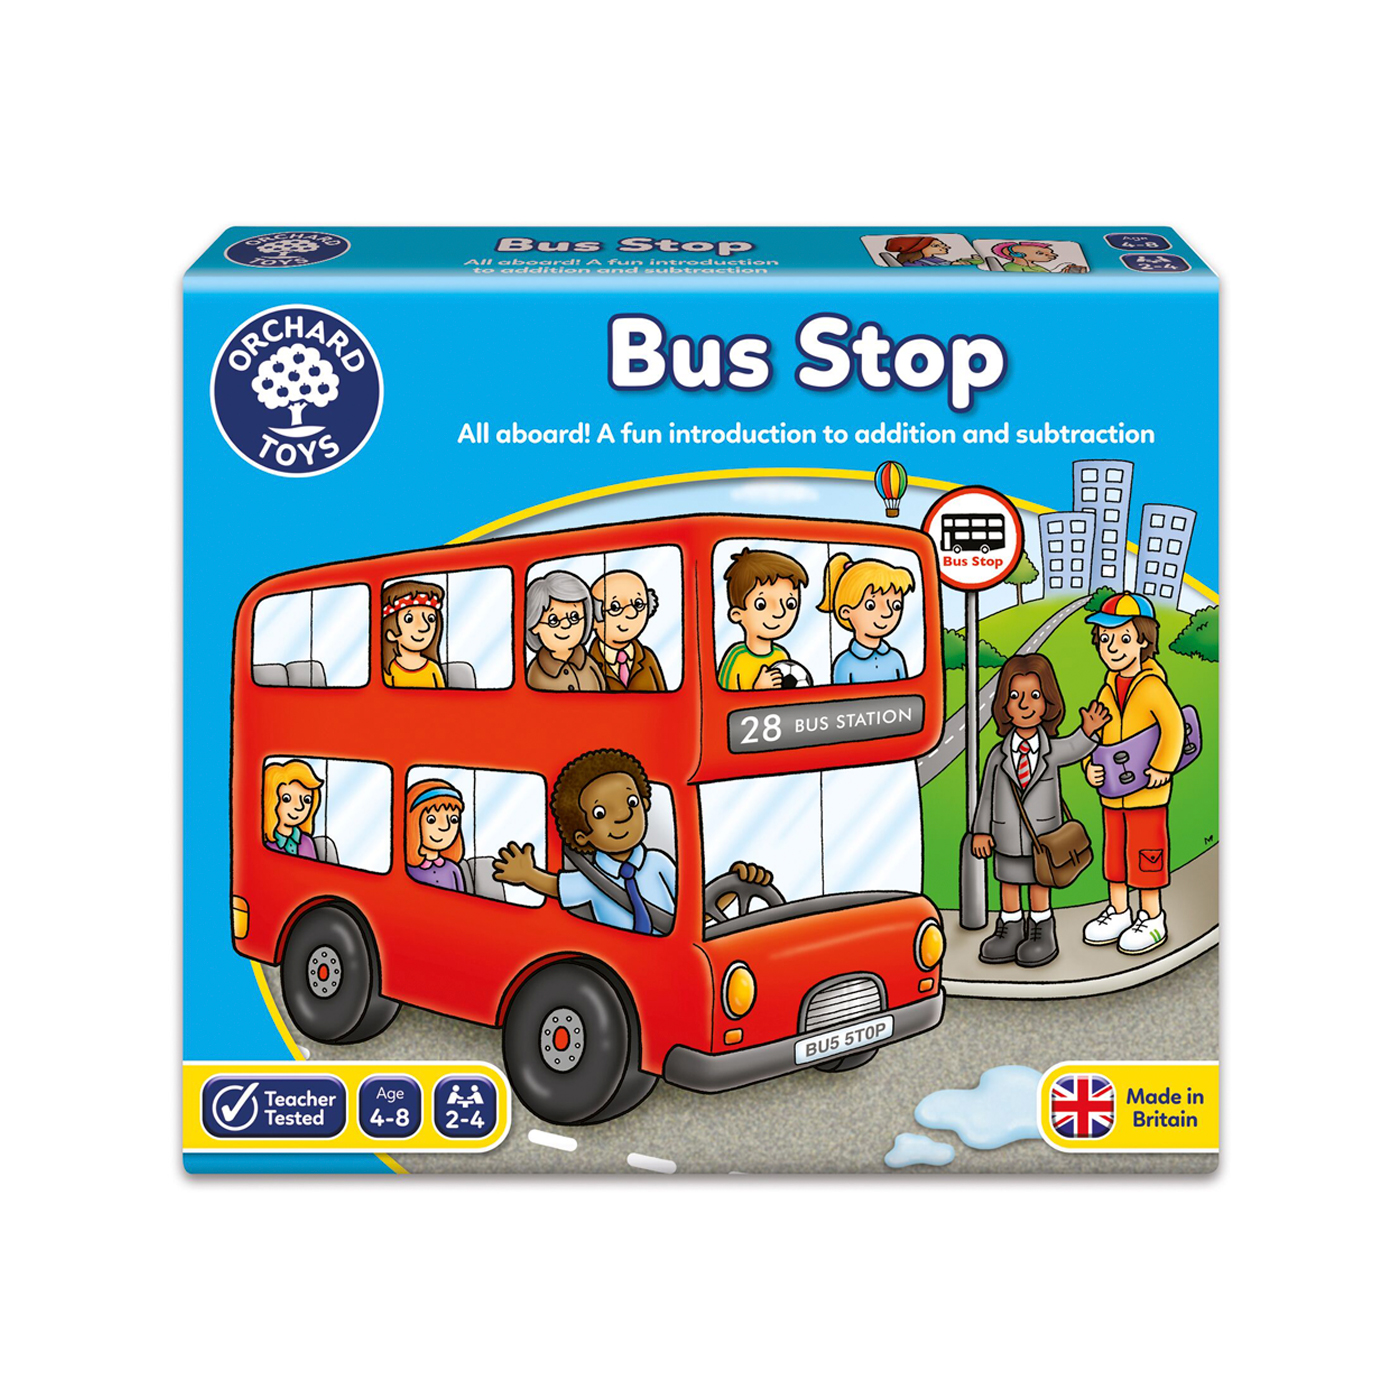 ORCHARD TOYS Orchard Toys Bus Stop 4-8 Yaş